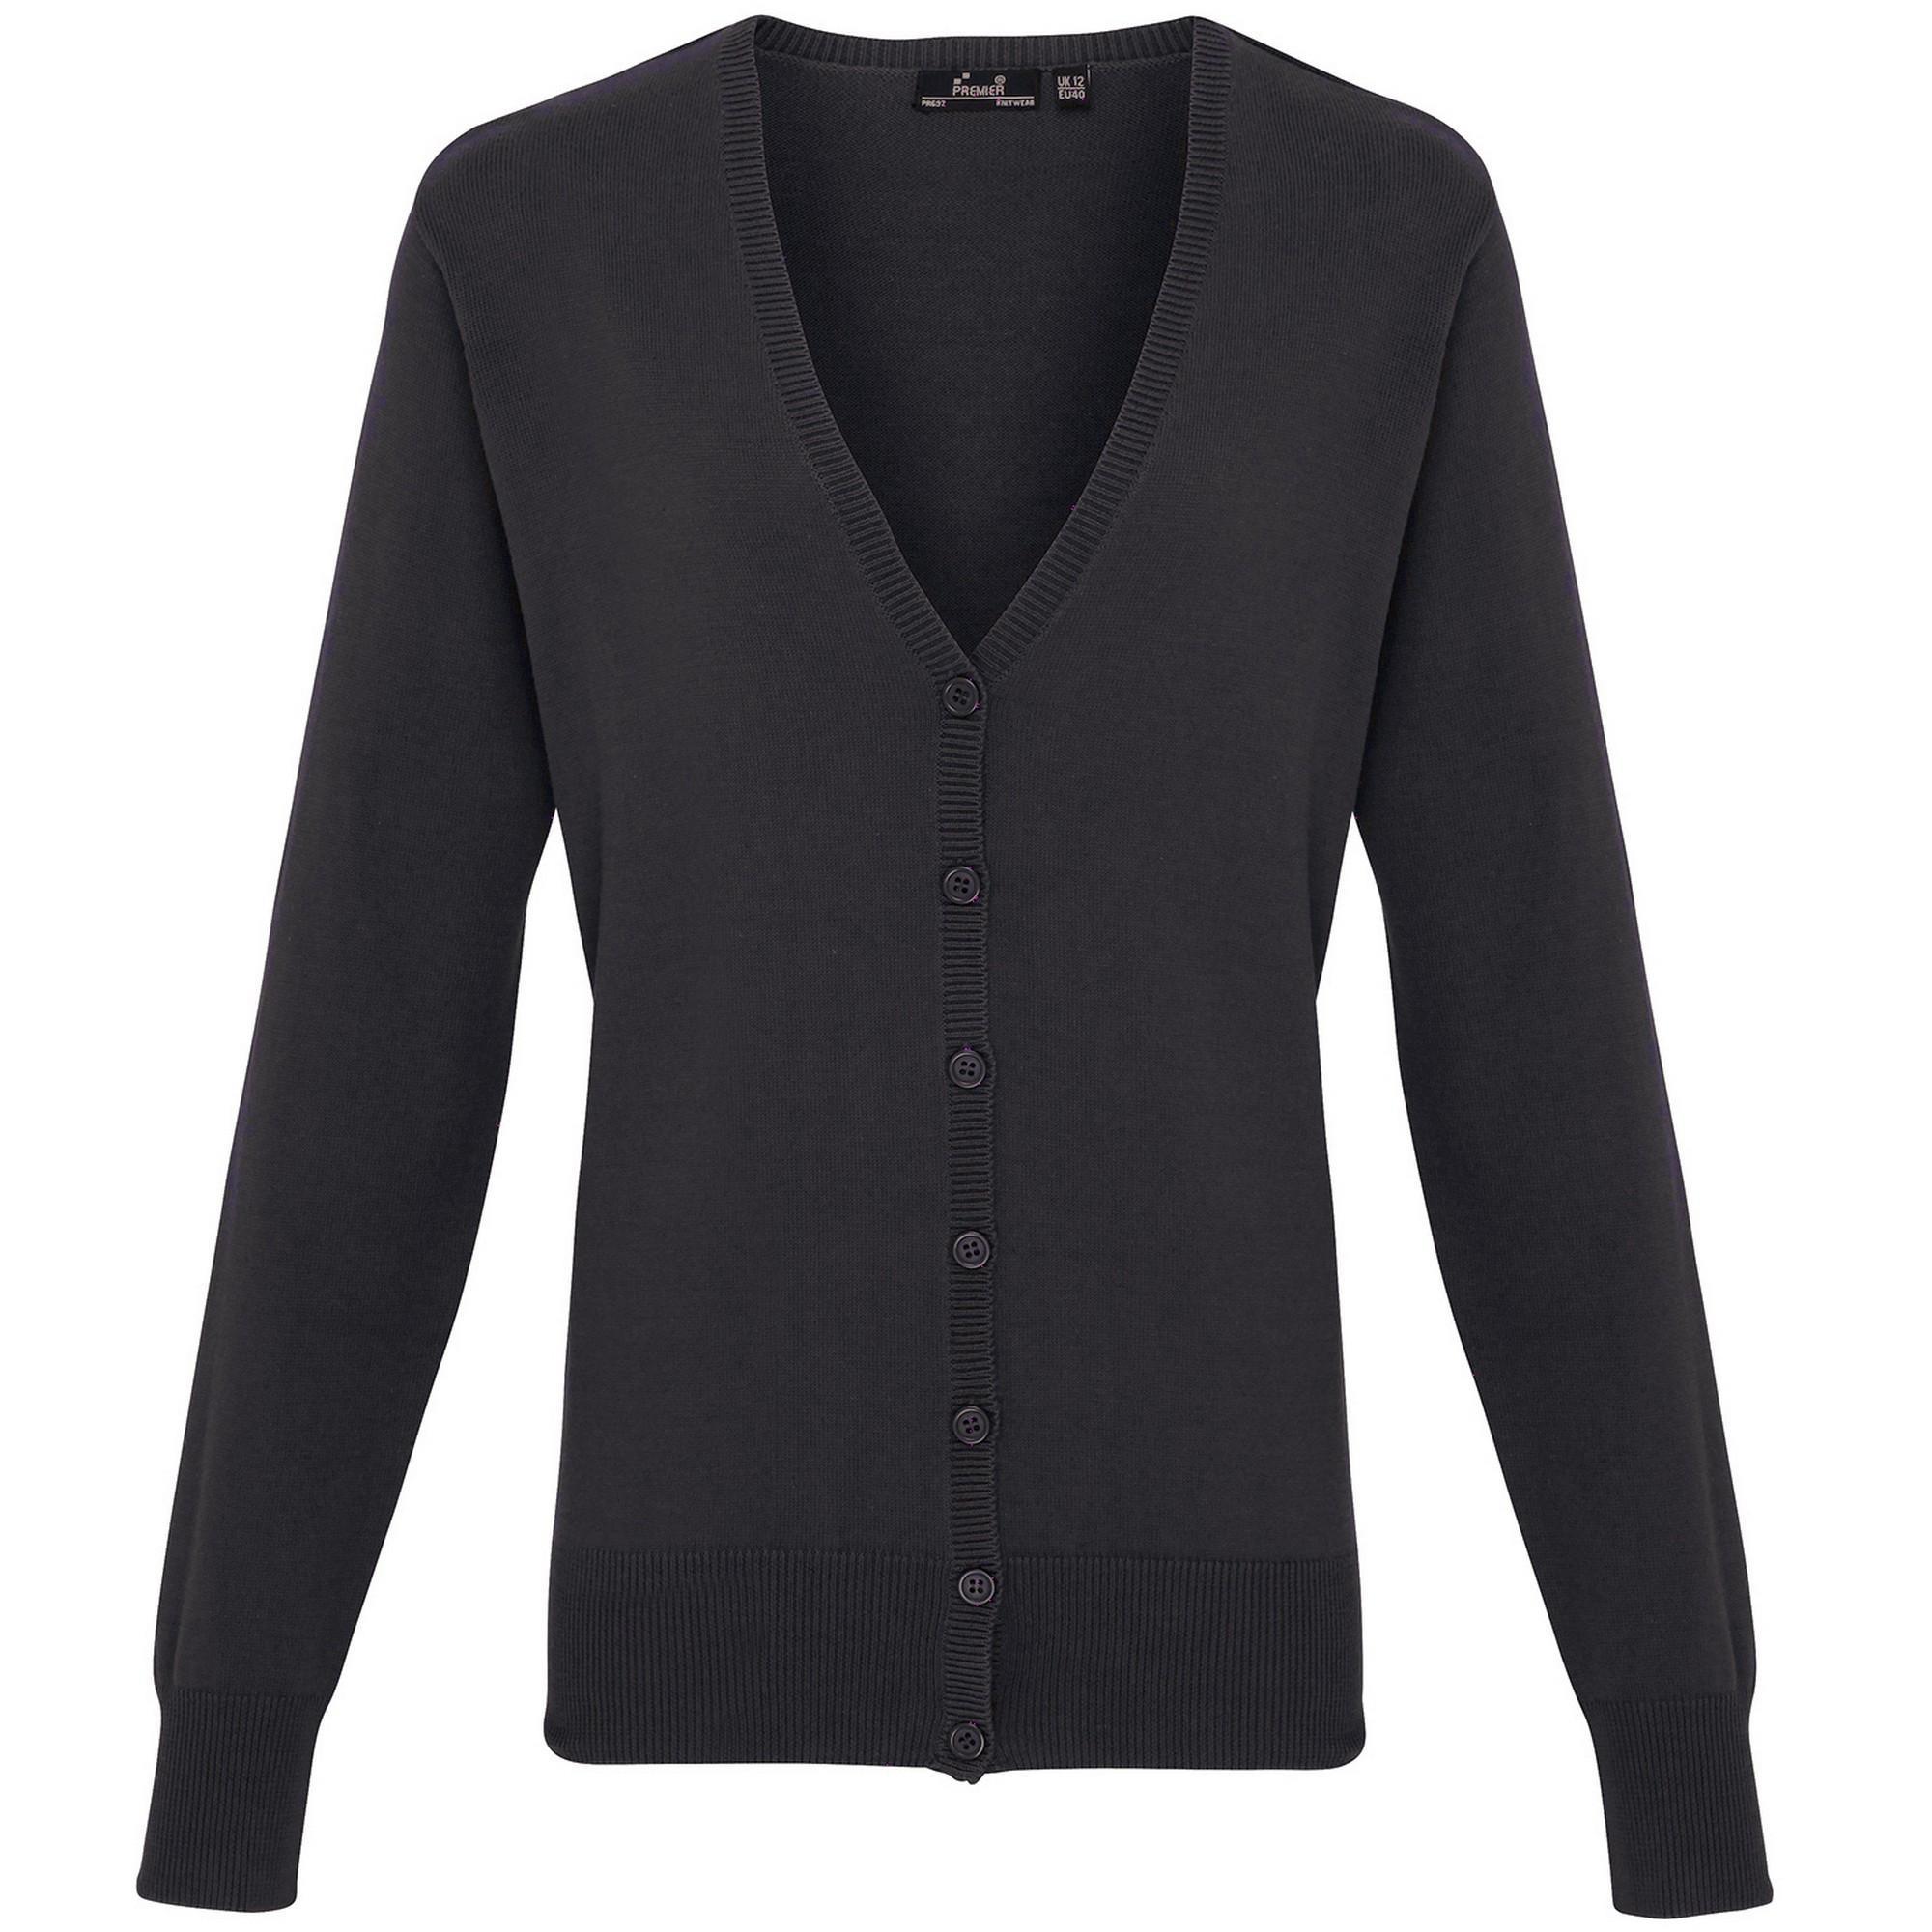 Premier Womens/Ladies Button Through Long Sleeve V-neck Knitted Cardigan (Charcoal) (22)